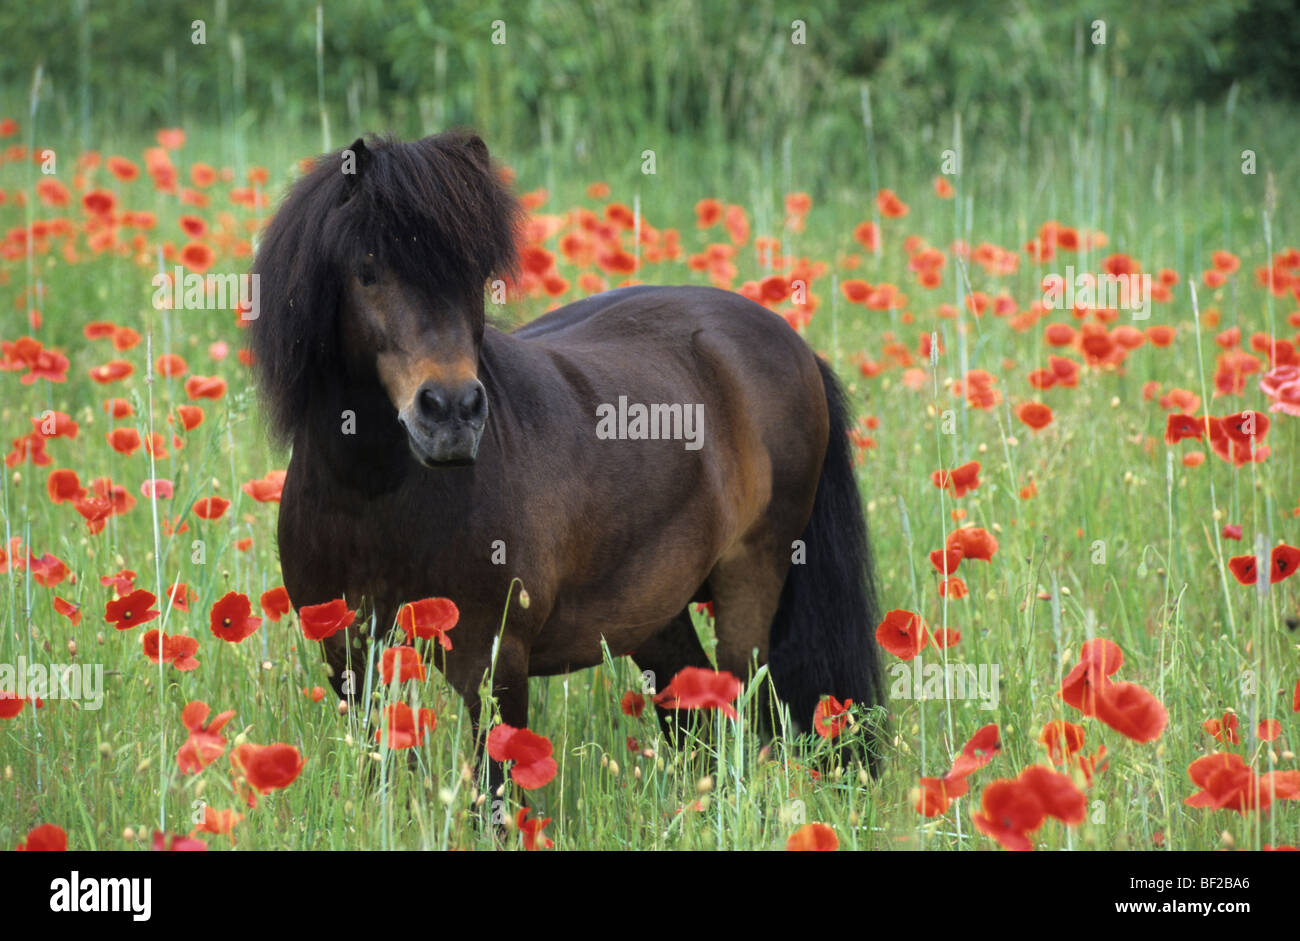 Shetland Pony (Equus caballus), stallion standing in a meadow with poppy flowers. Stock Photo